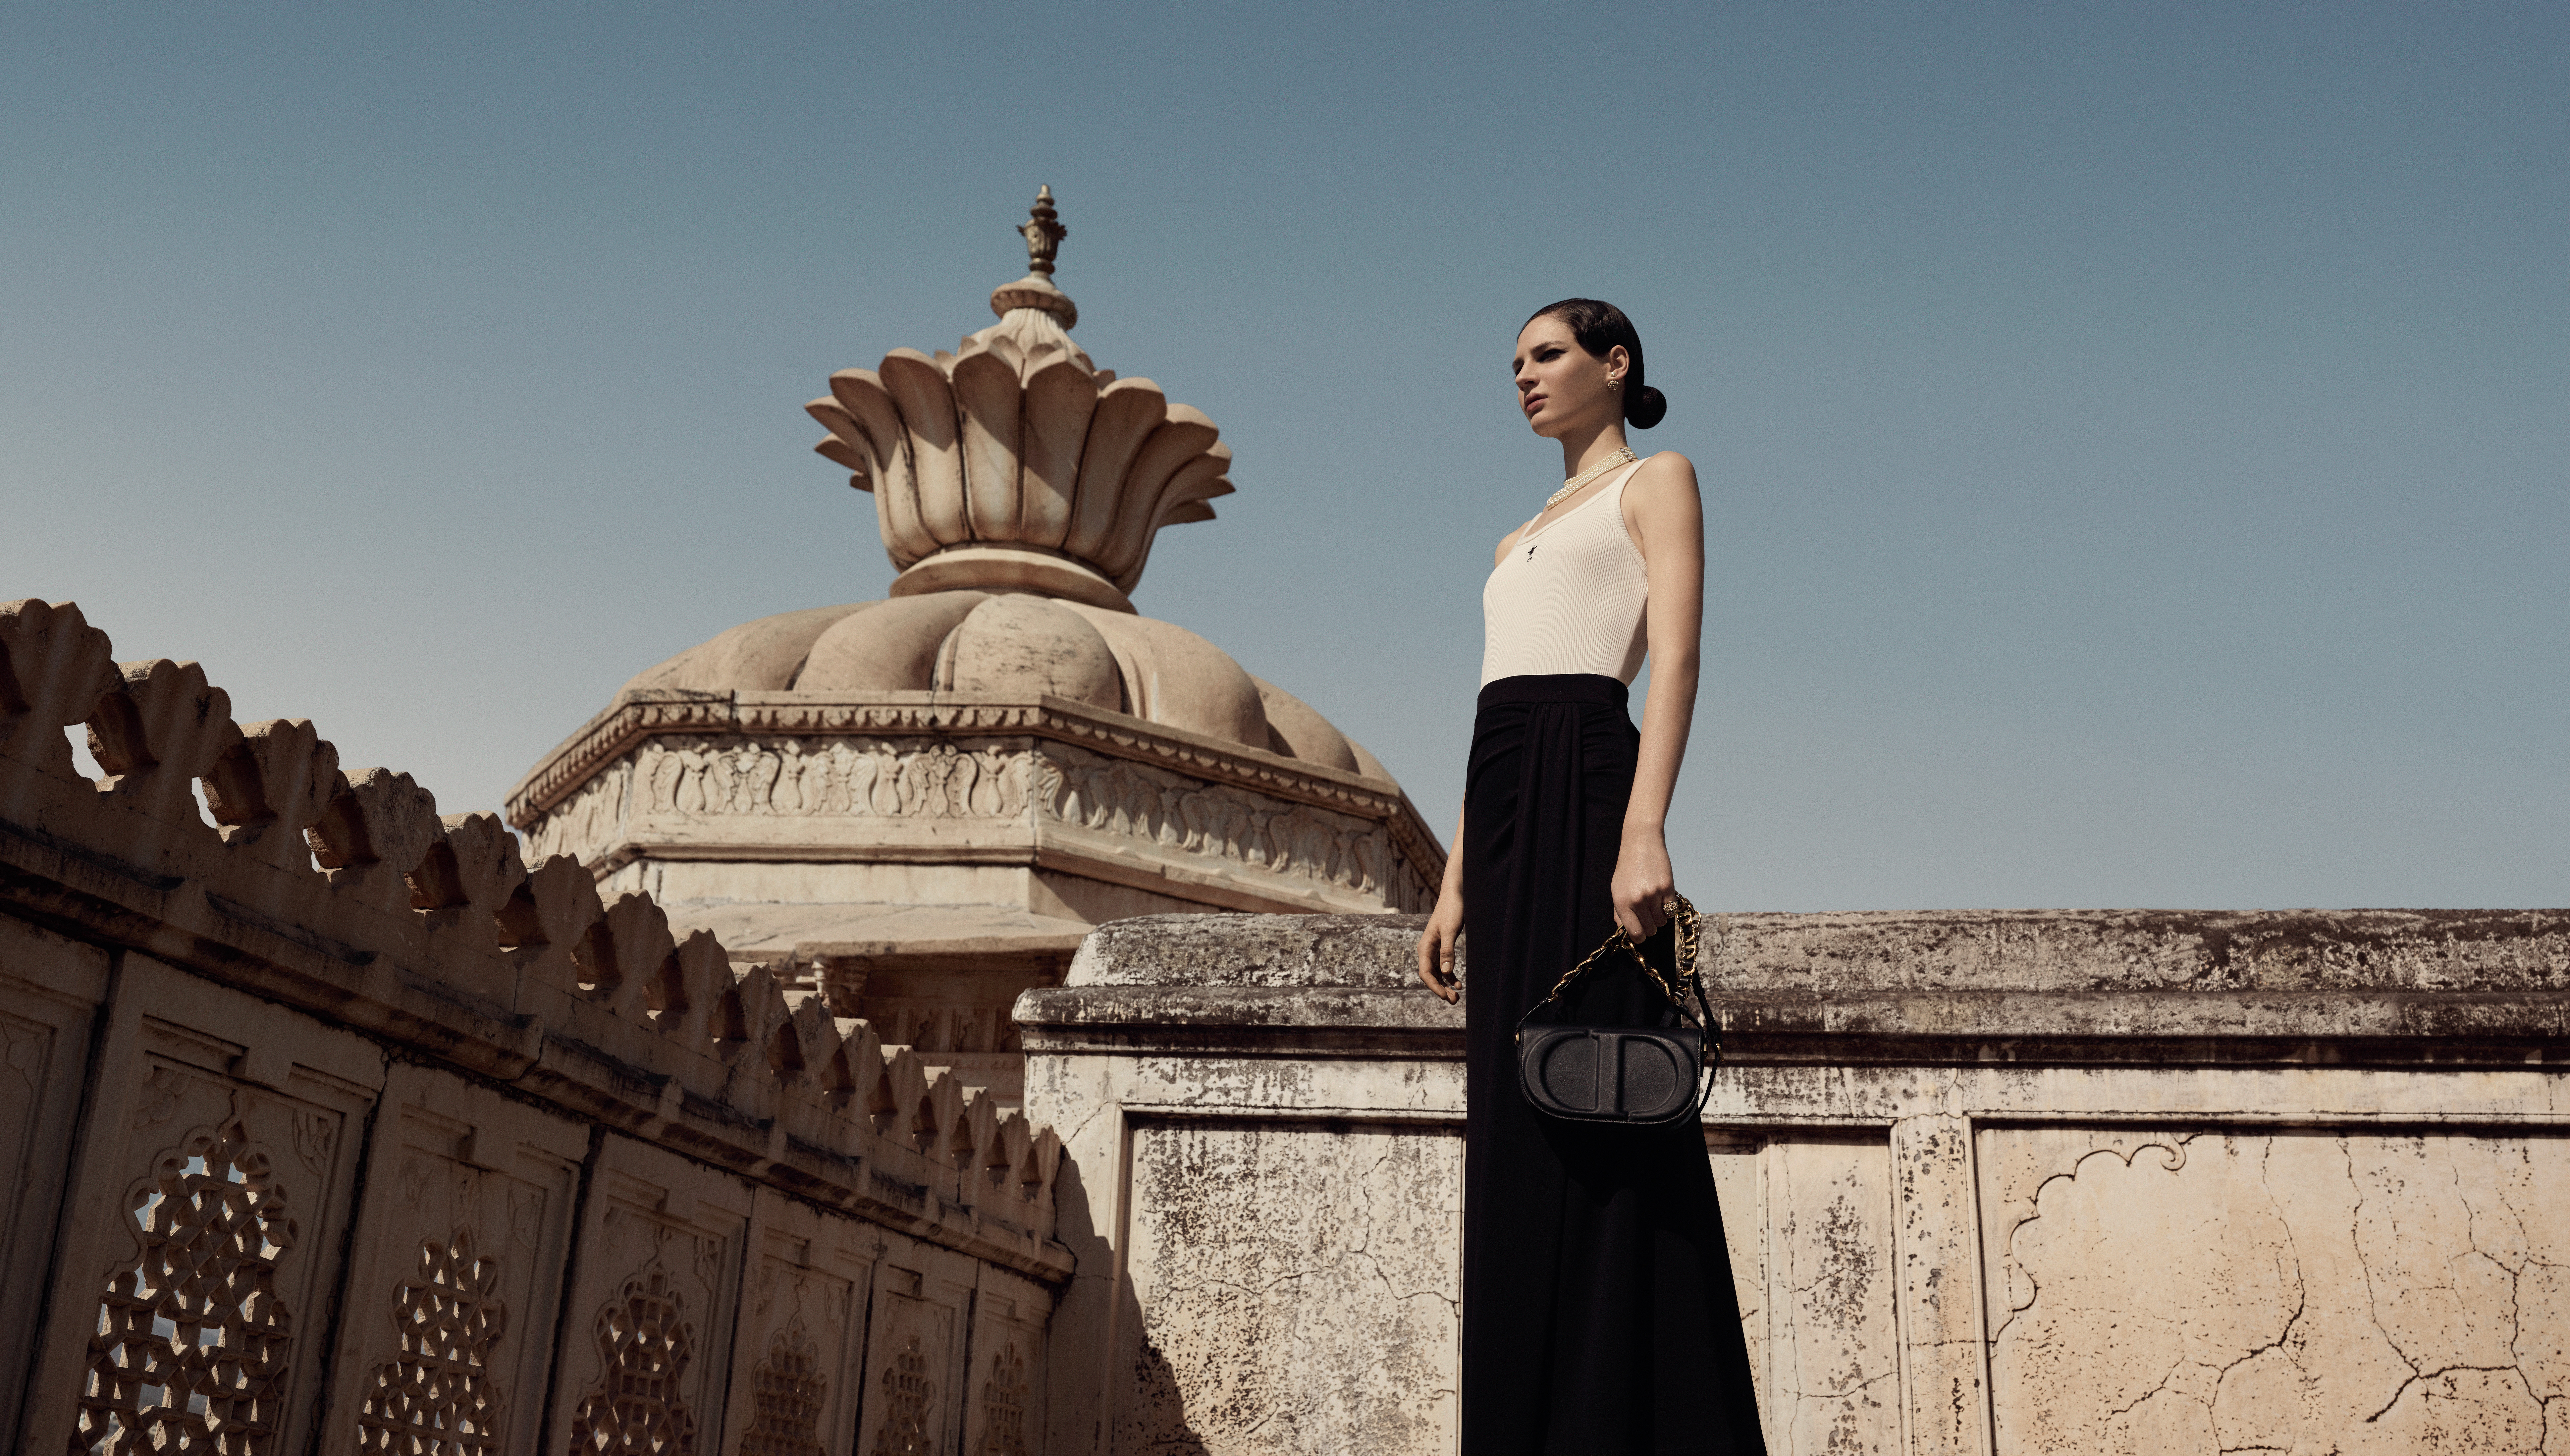 Dior Fall 2023 Show, It's nearly time for the Dior Fall 2023 collection by  Maria Grazia Chiuri, set to be unveiled at the historic Gateway of India,  Mumbai, on March 30, 2023, By Dior